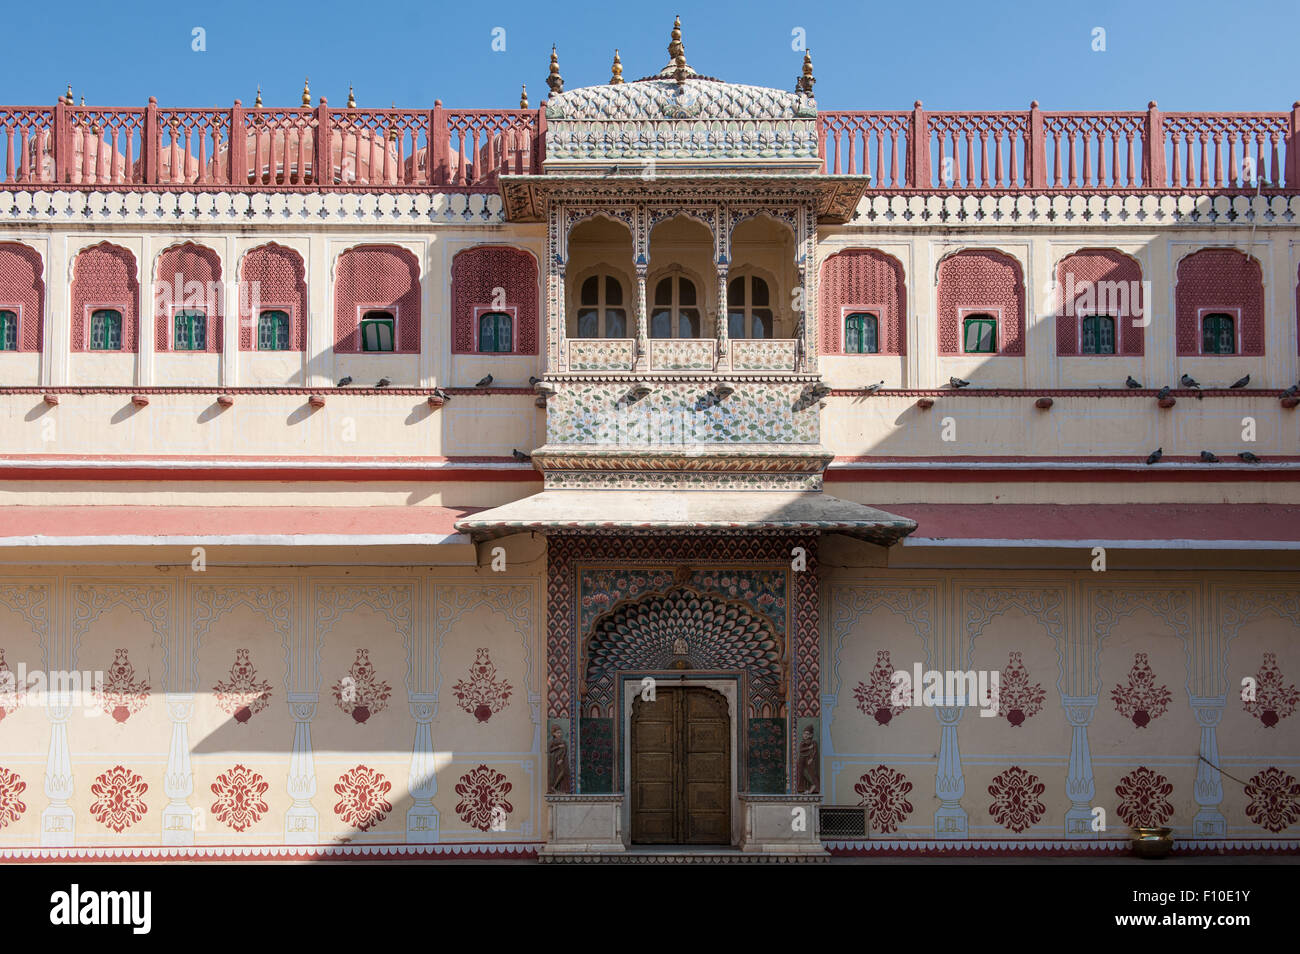 Jaipur, India. The  City Palace Pritam Niwas Chowk courtyard; detail of the Southwest Lotus gate, dedicated to Lord Shiva-Parvati with painted flowers and petals. Stock Photo